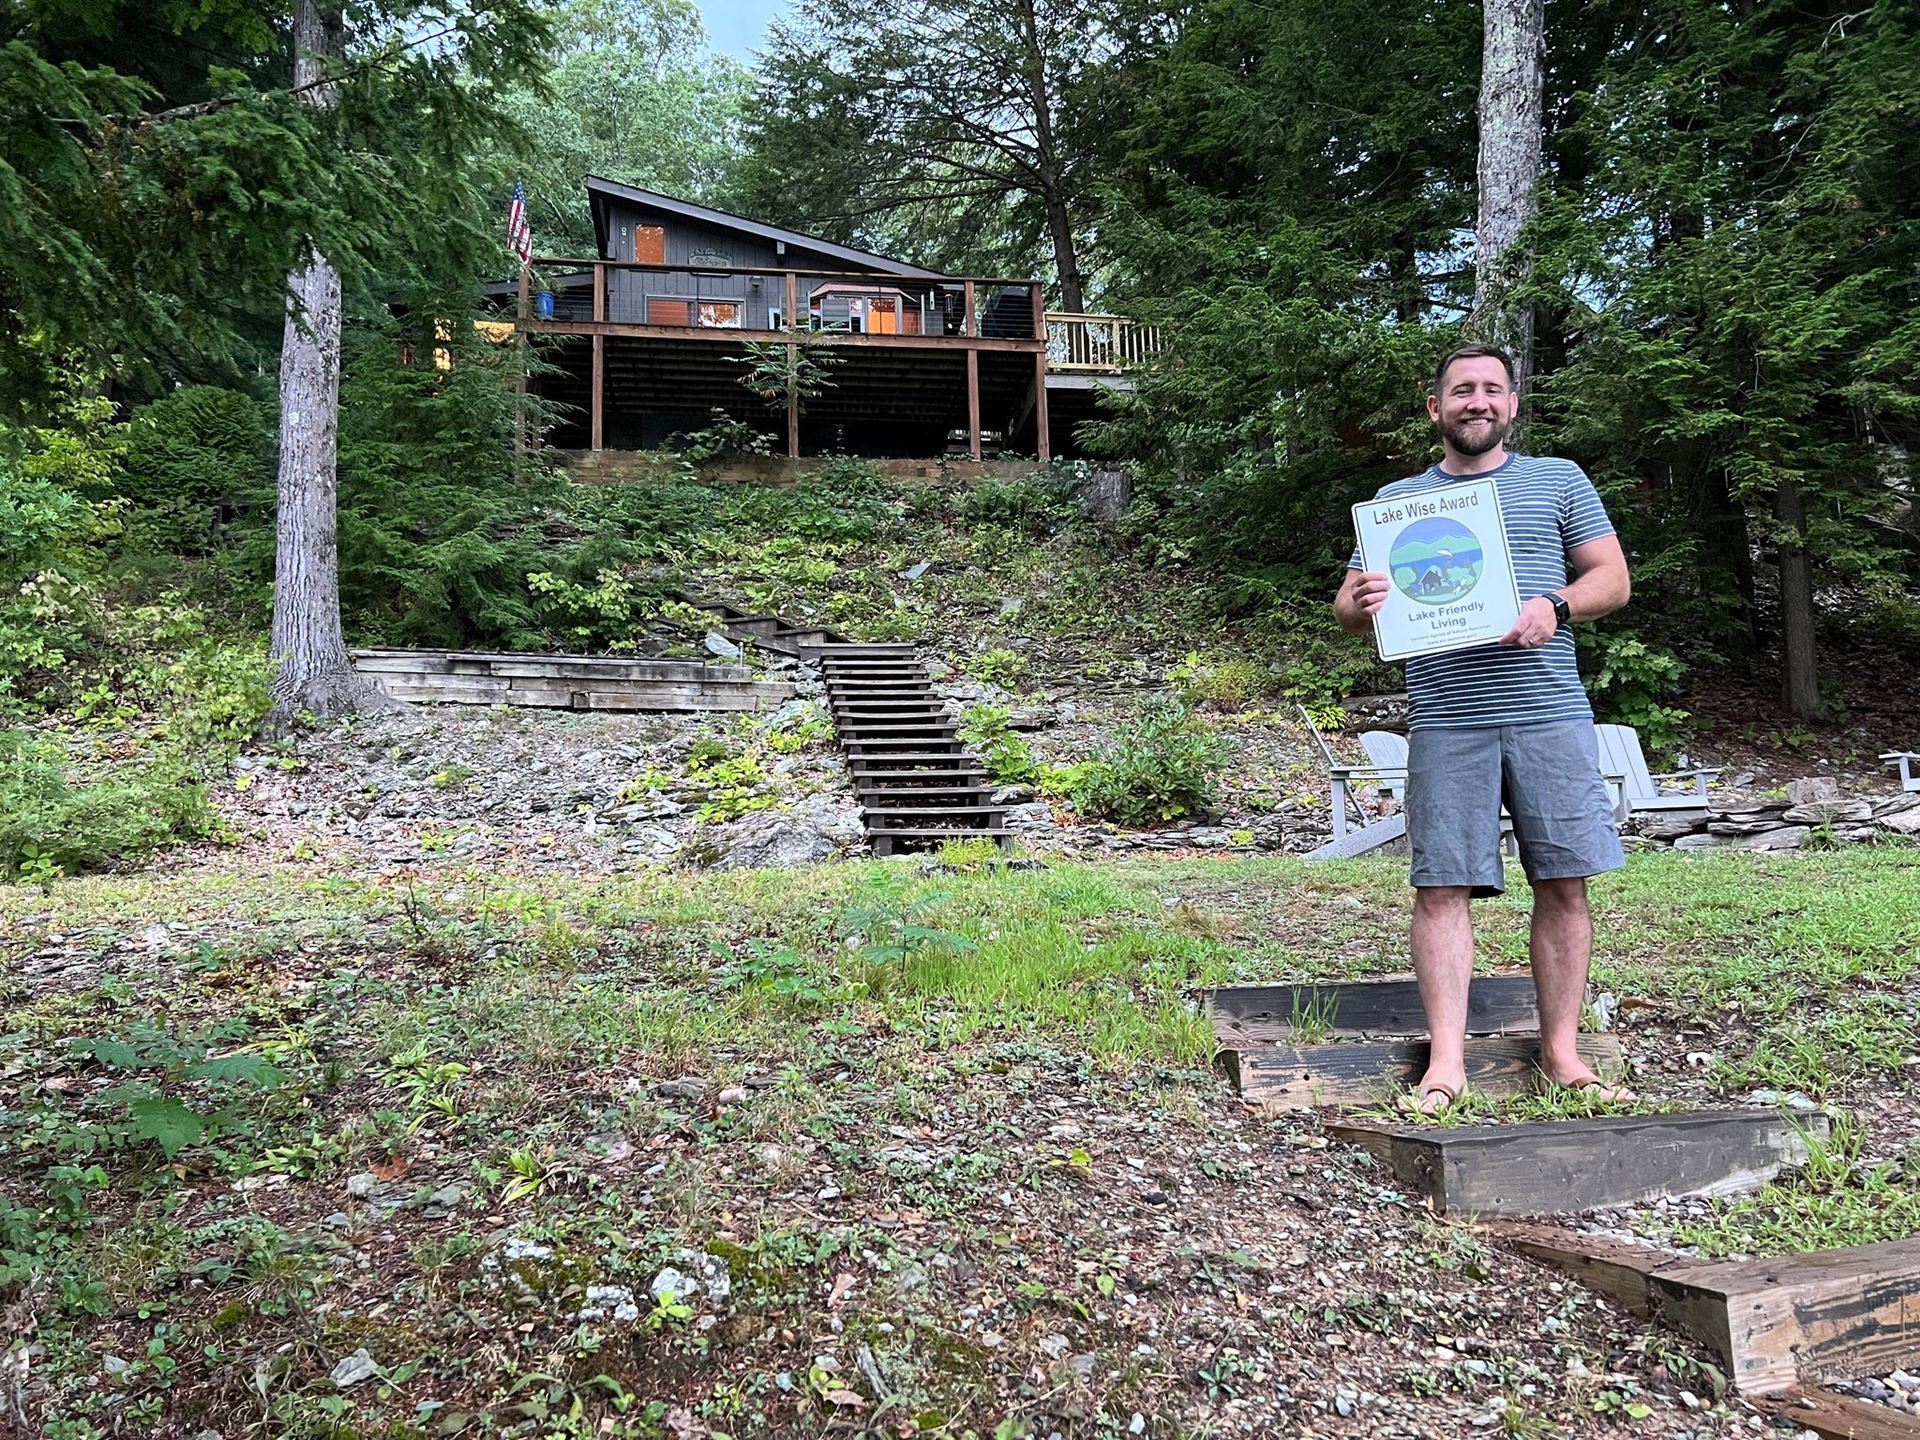 Andrew Gioulis, one of 4 Lake Wise Award winners on Lake St. Catherine in 2021.